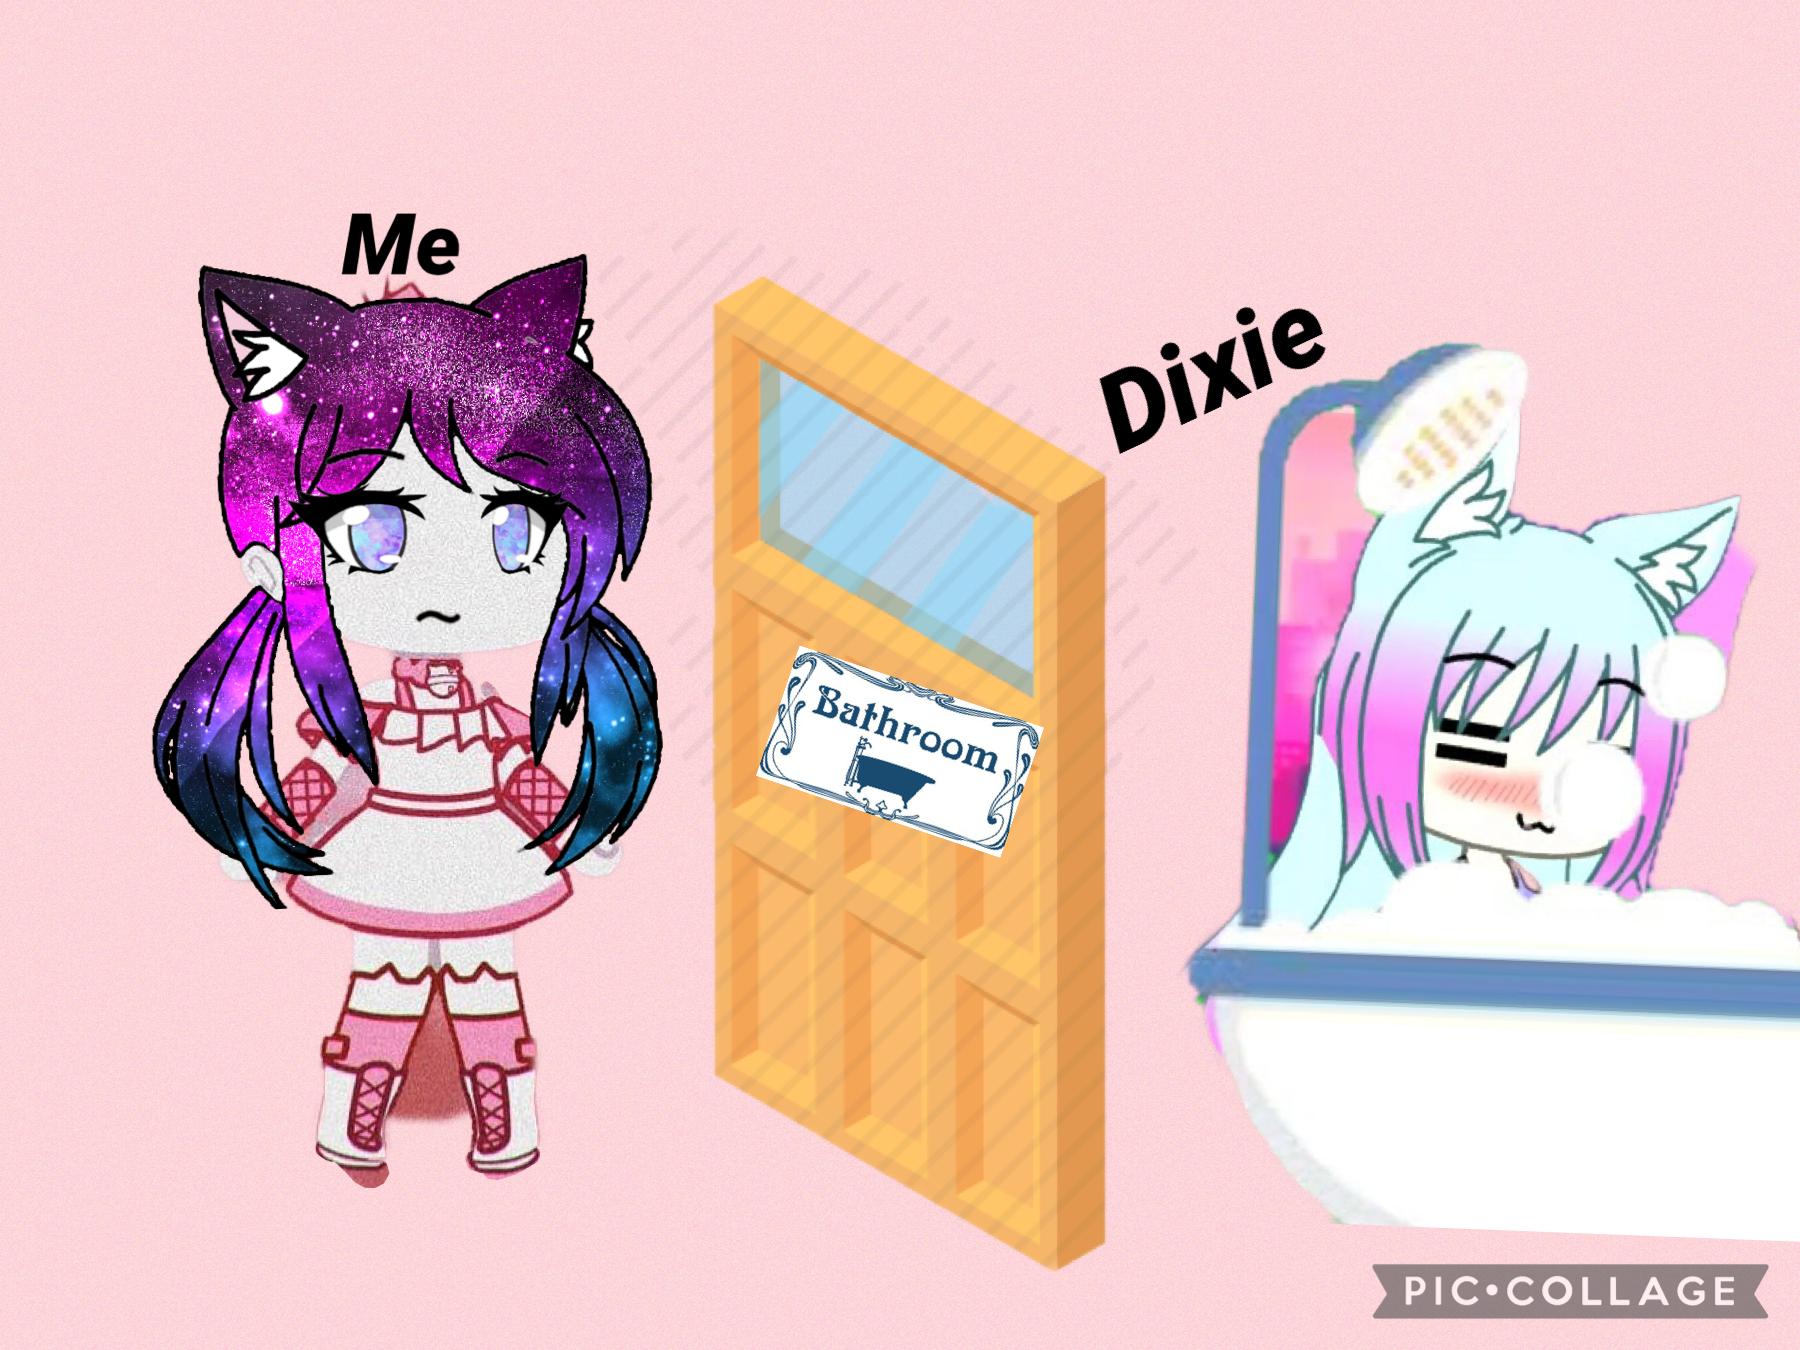 Day with Dixie she’s my cousin!!! (gacha story)